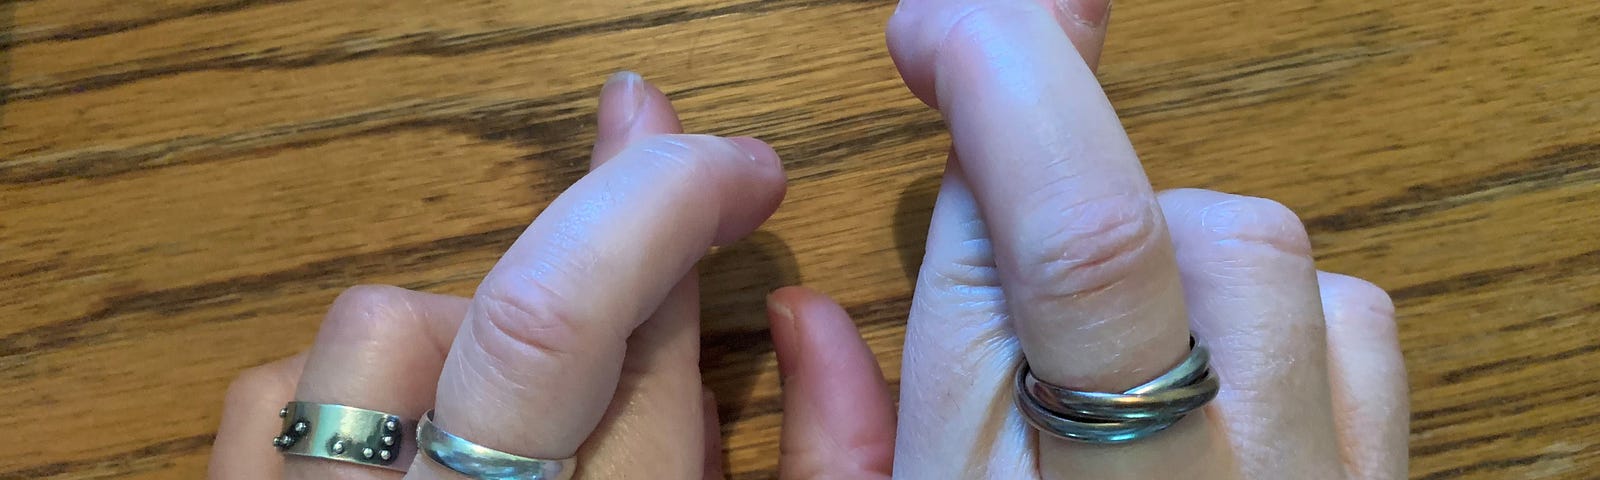 Two Caucasian hands side by side with crossed fingers on each hand.